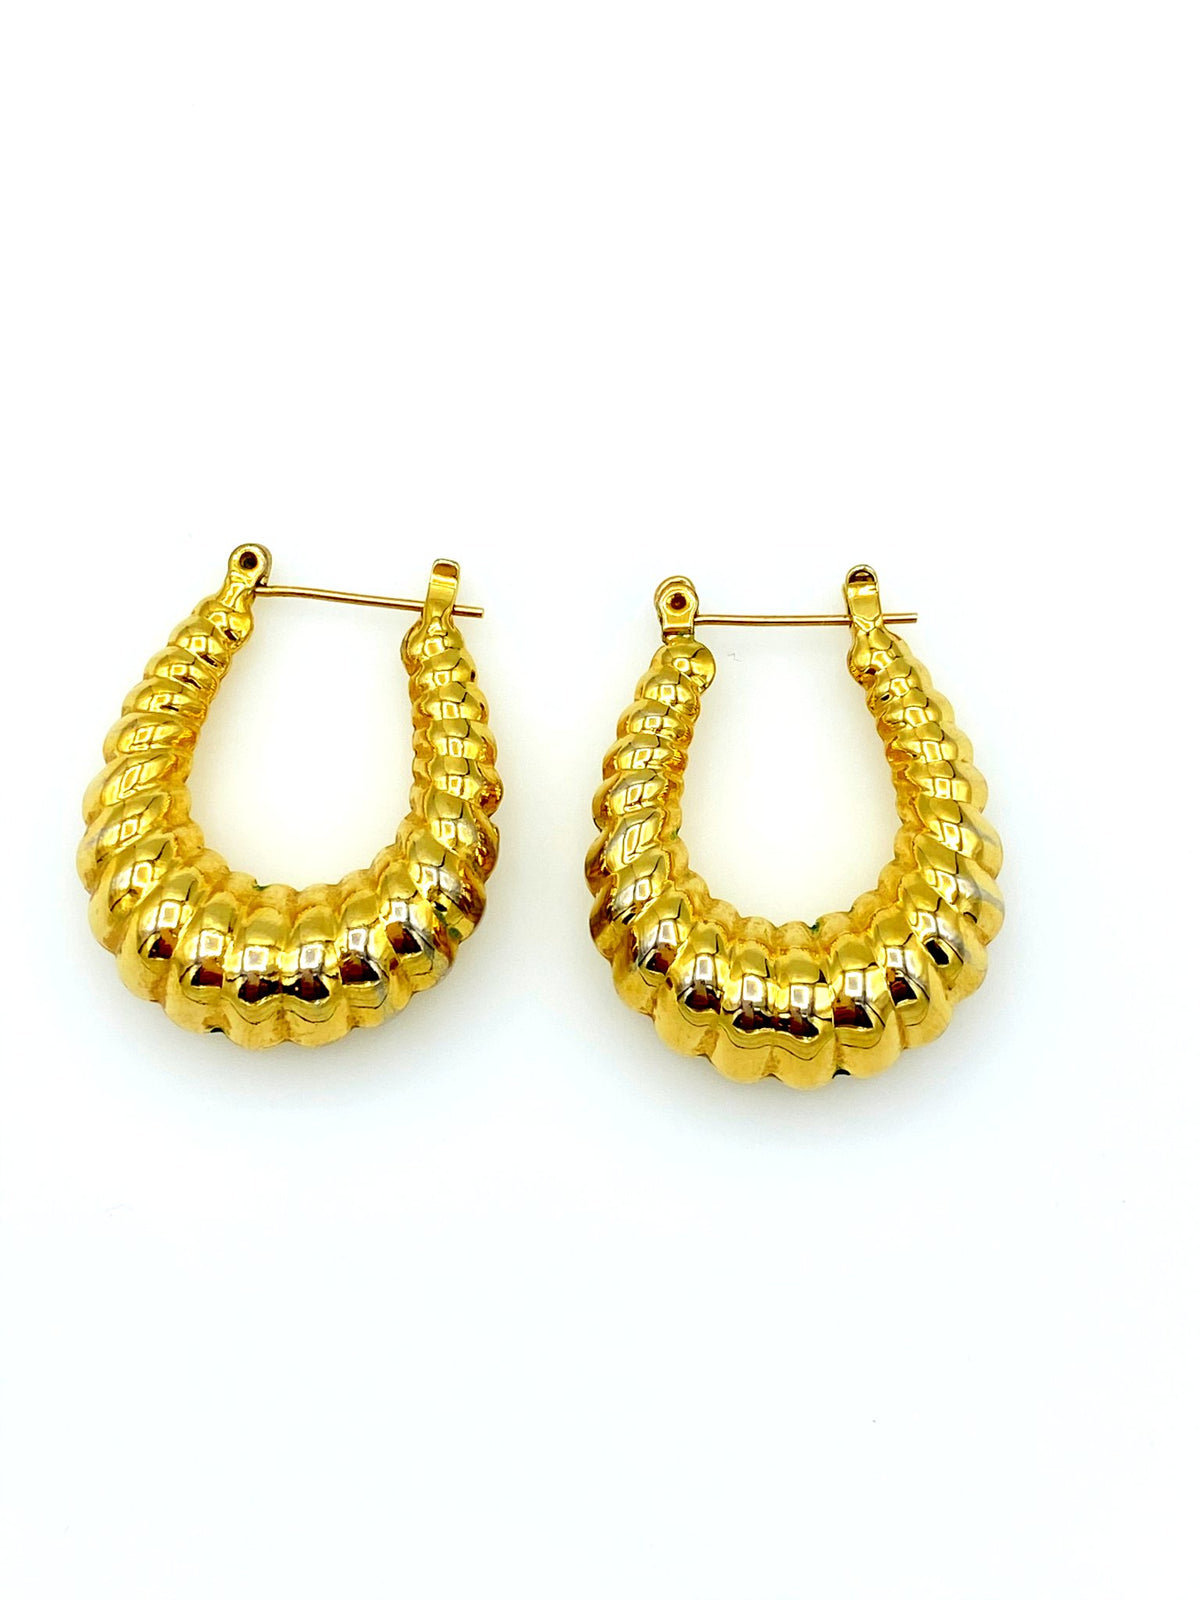 Gold Puffy Scallop Vintage Hoop Pierced Earrings - 24 Wishes Vintage Jewelry